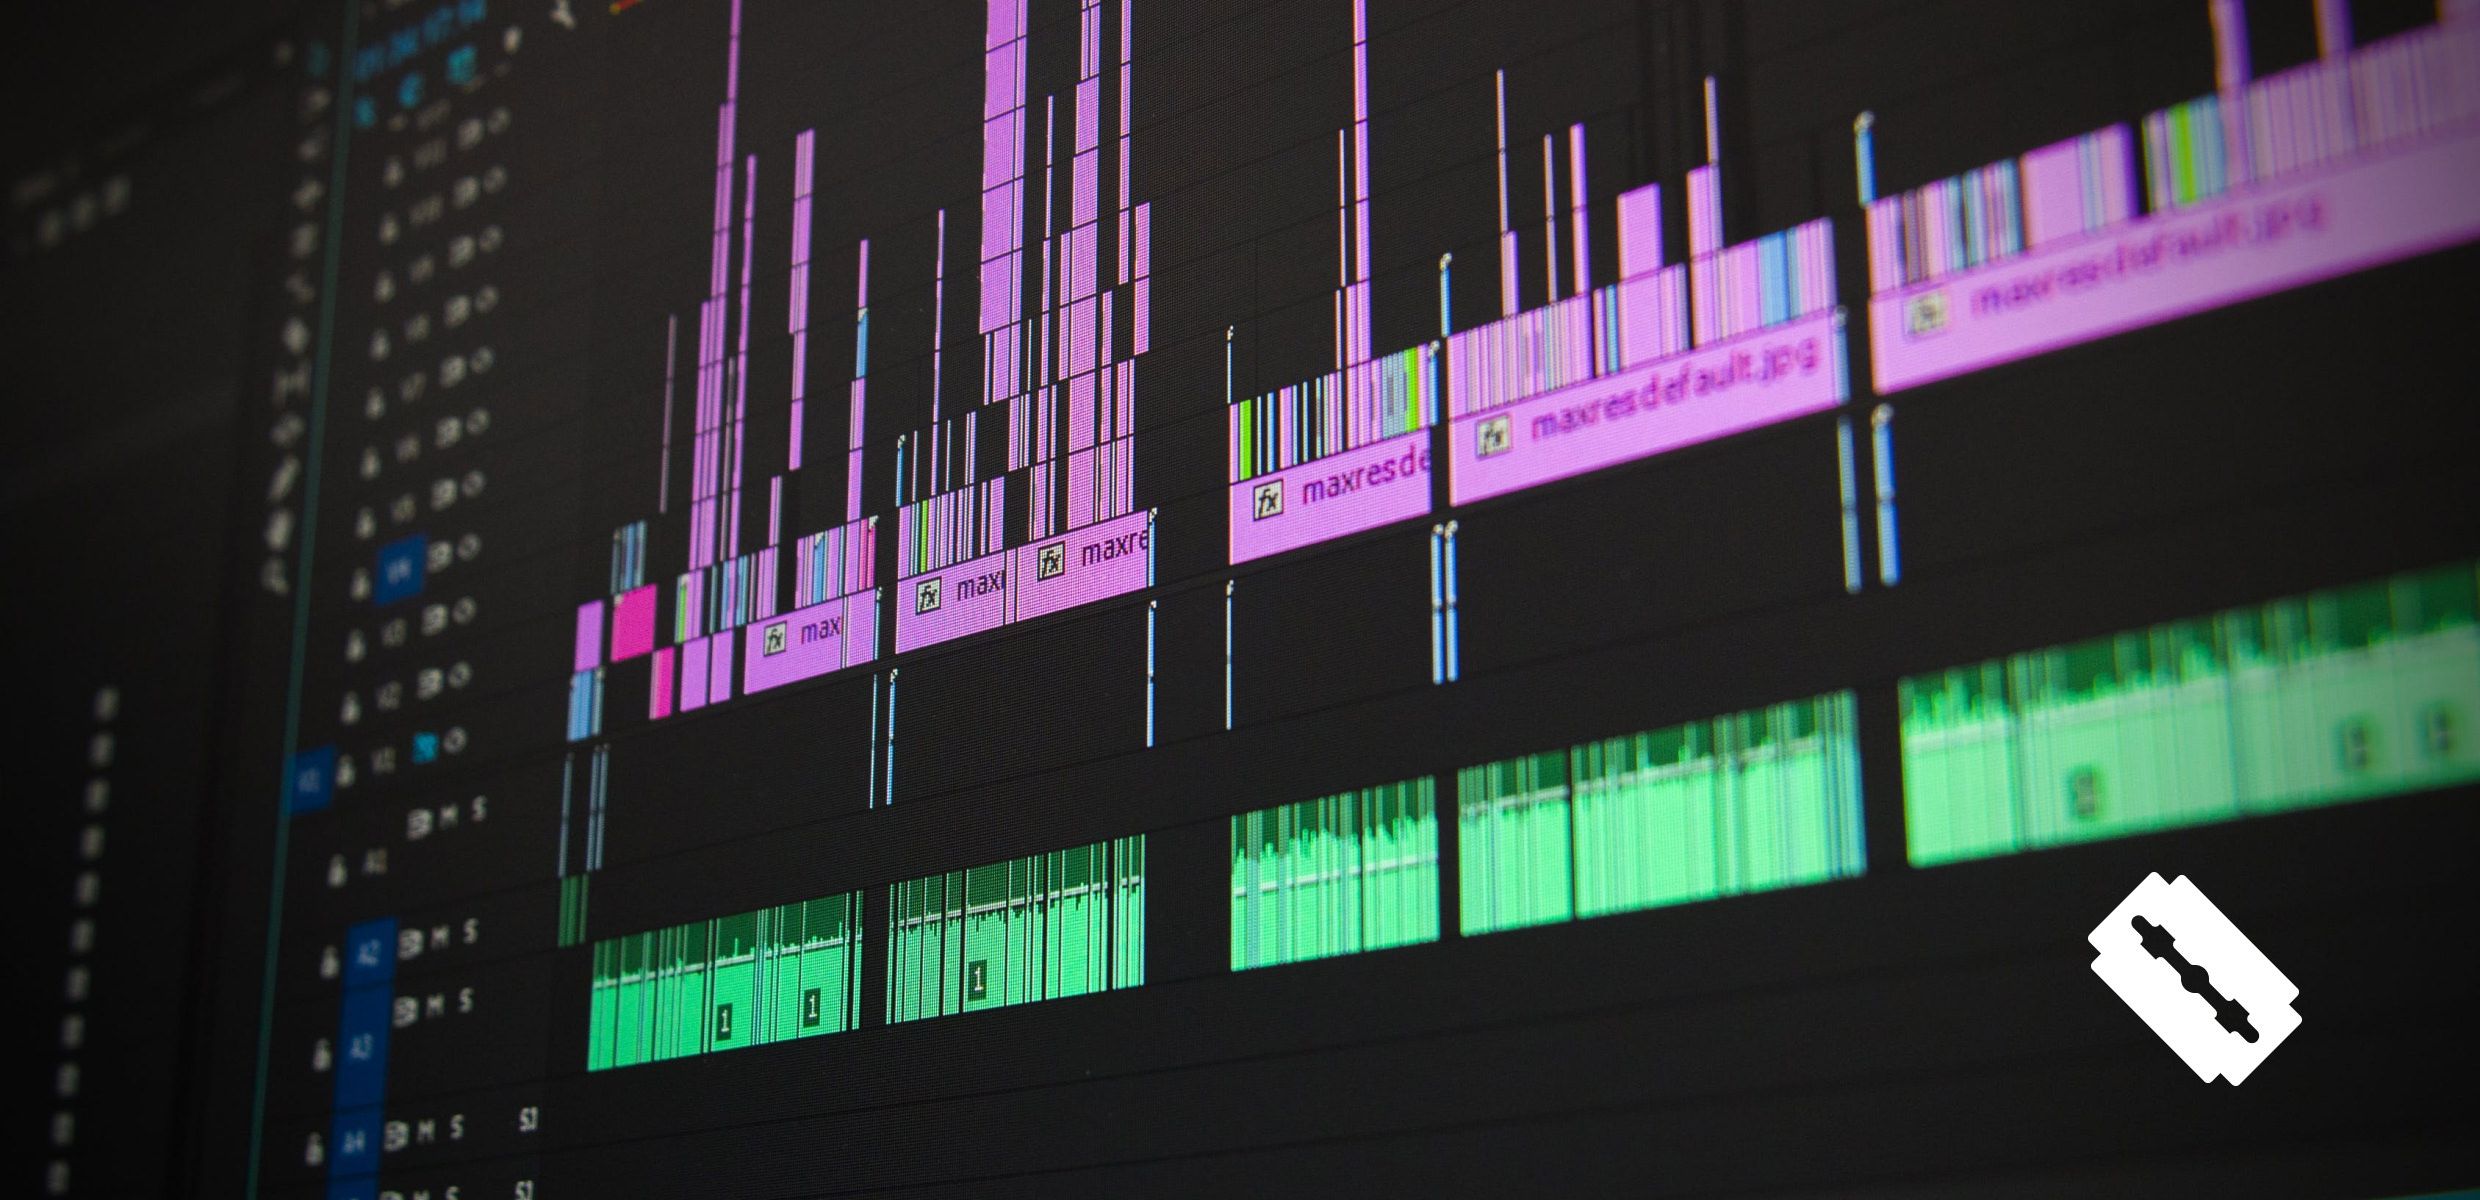 How to Cut Music to Match Your Video in Premiere Pro